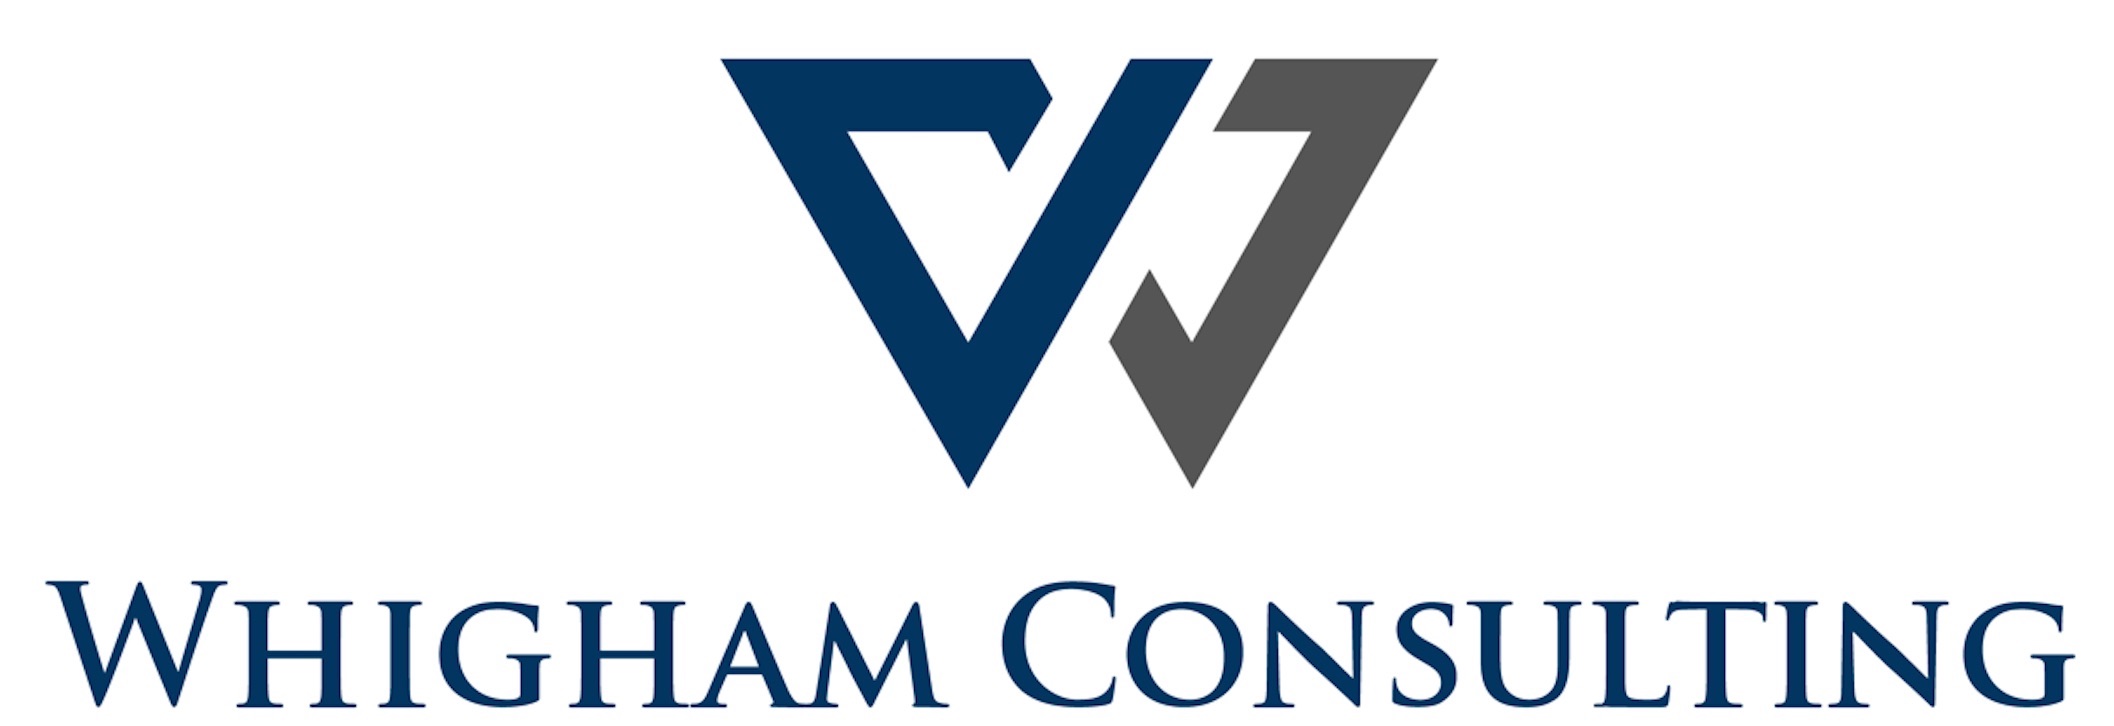 Whigham Consulting